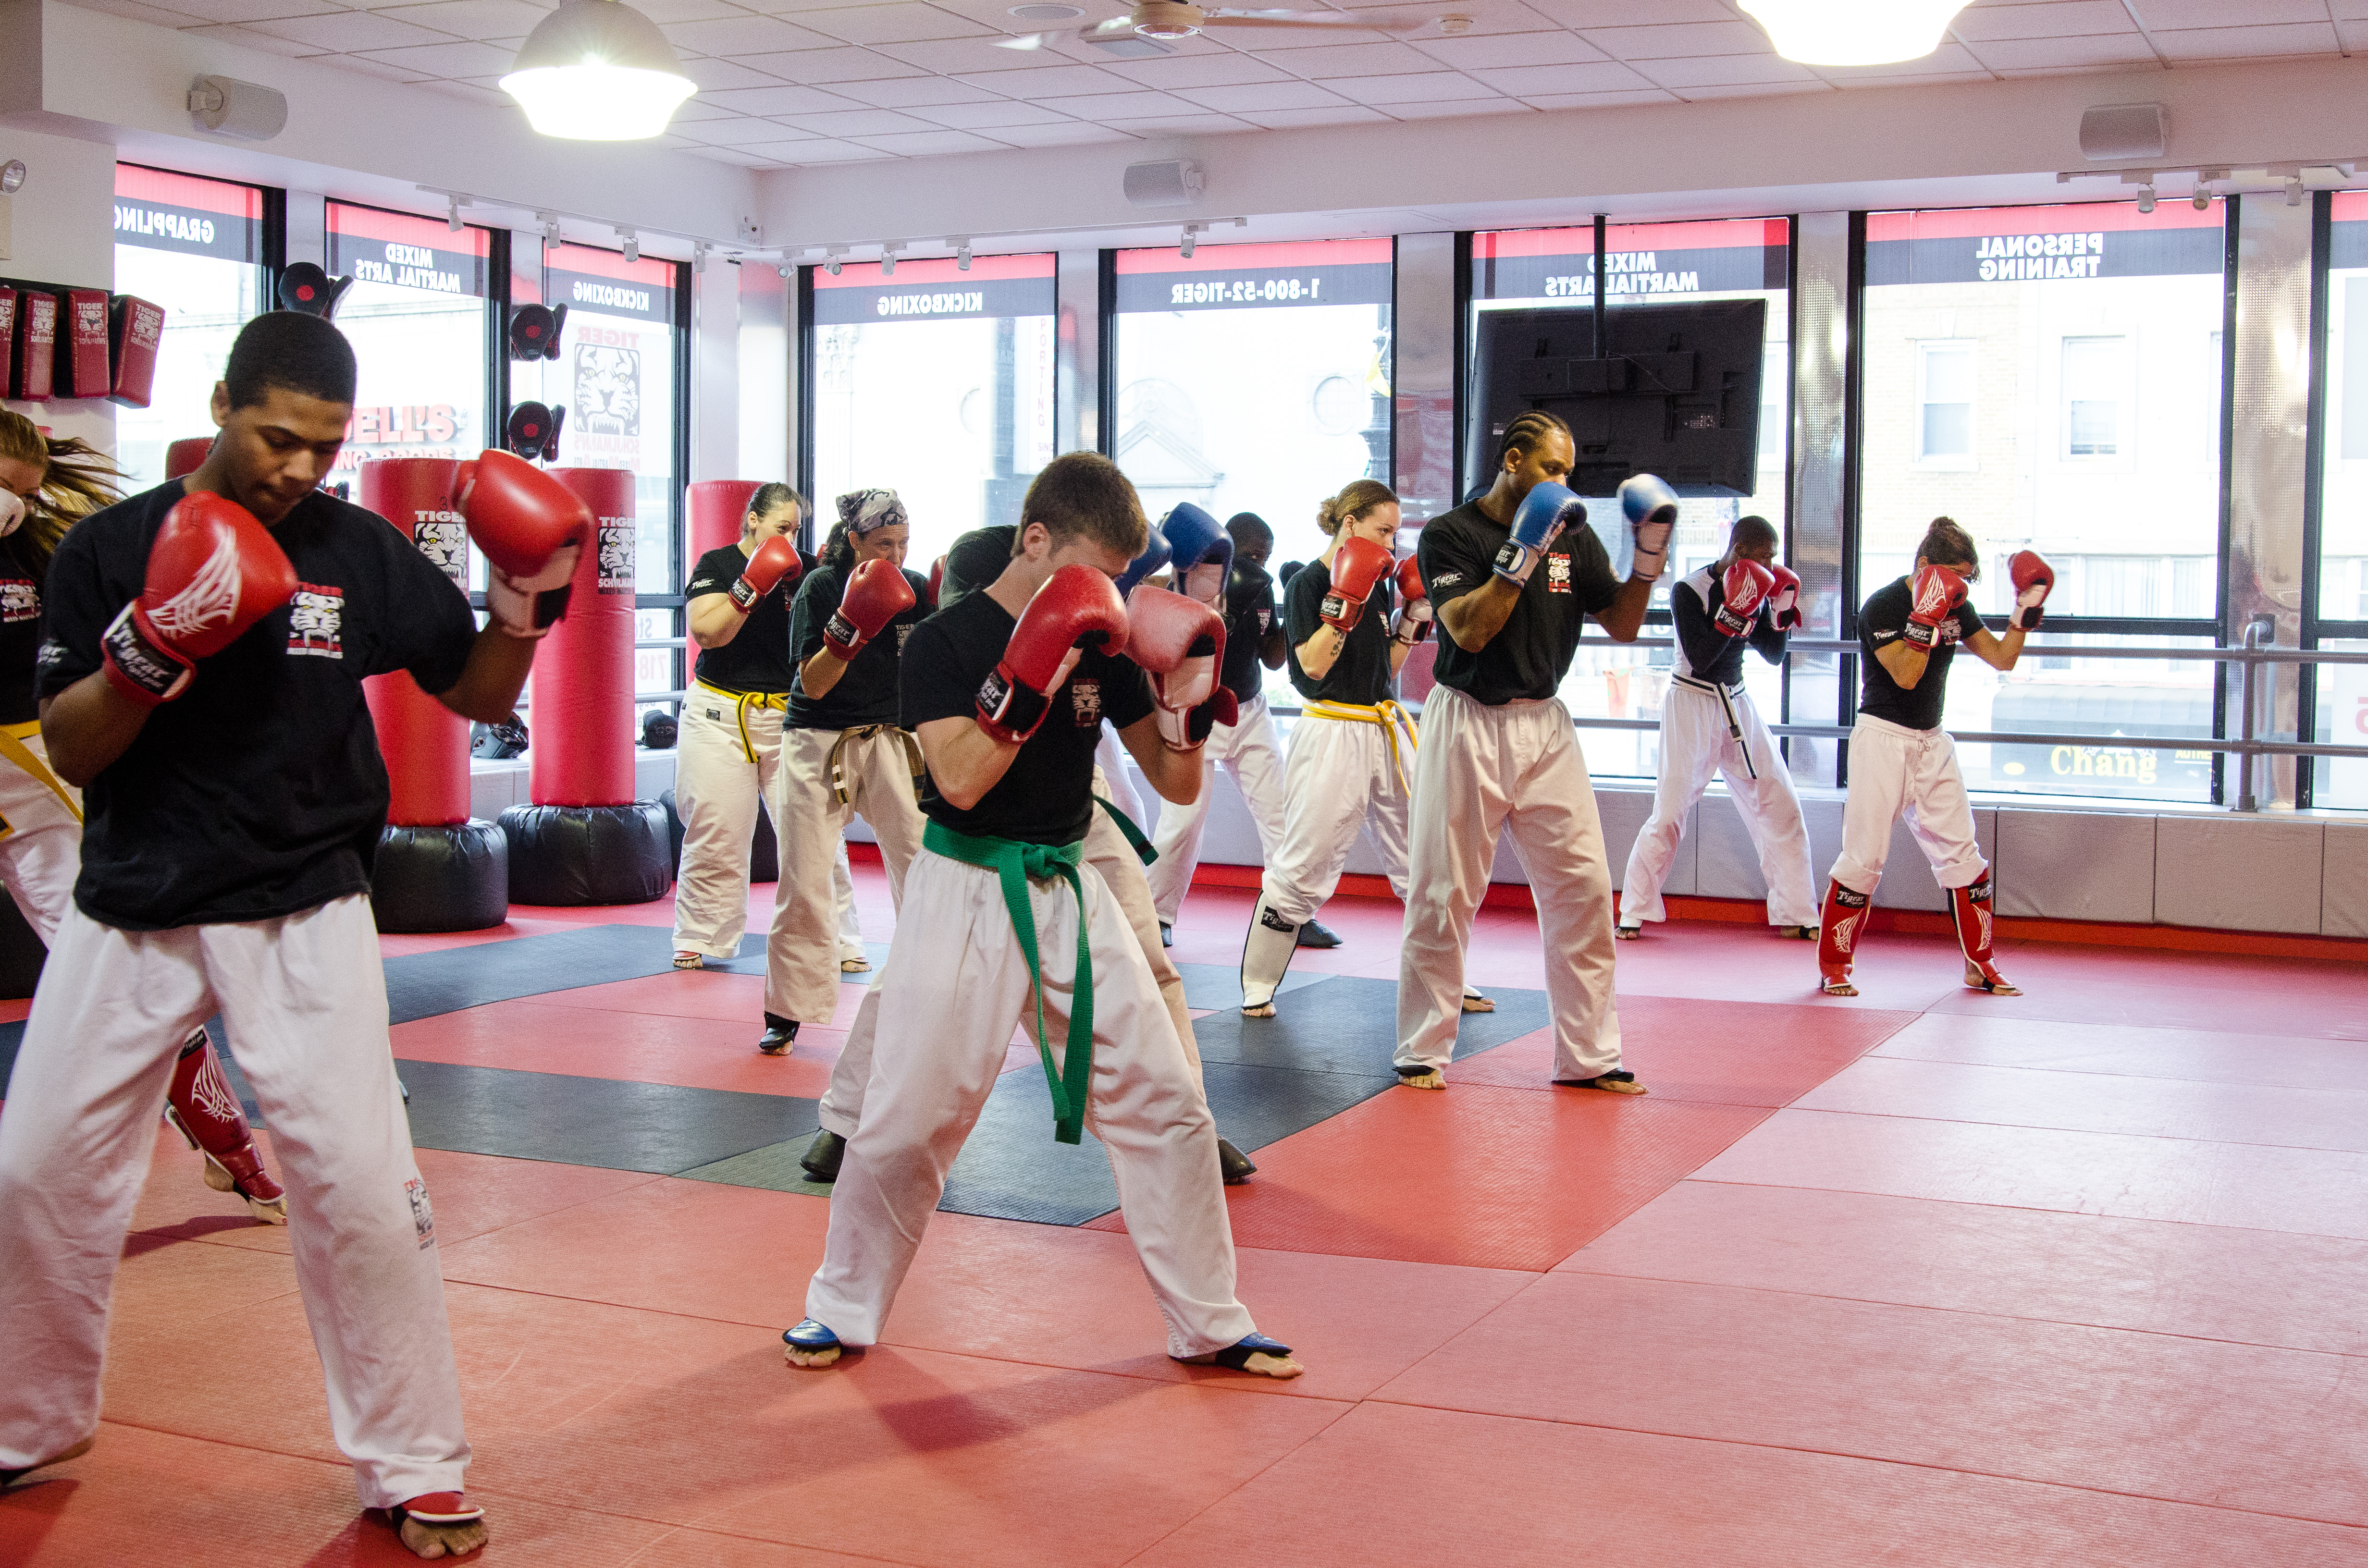 Kickboxing in East Brunswick, NJ is a gift of health and self-defense